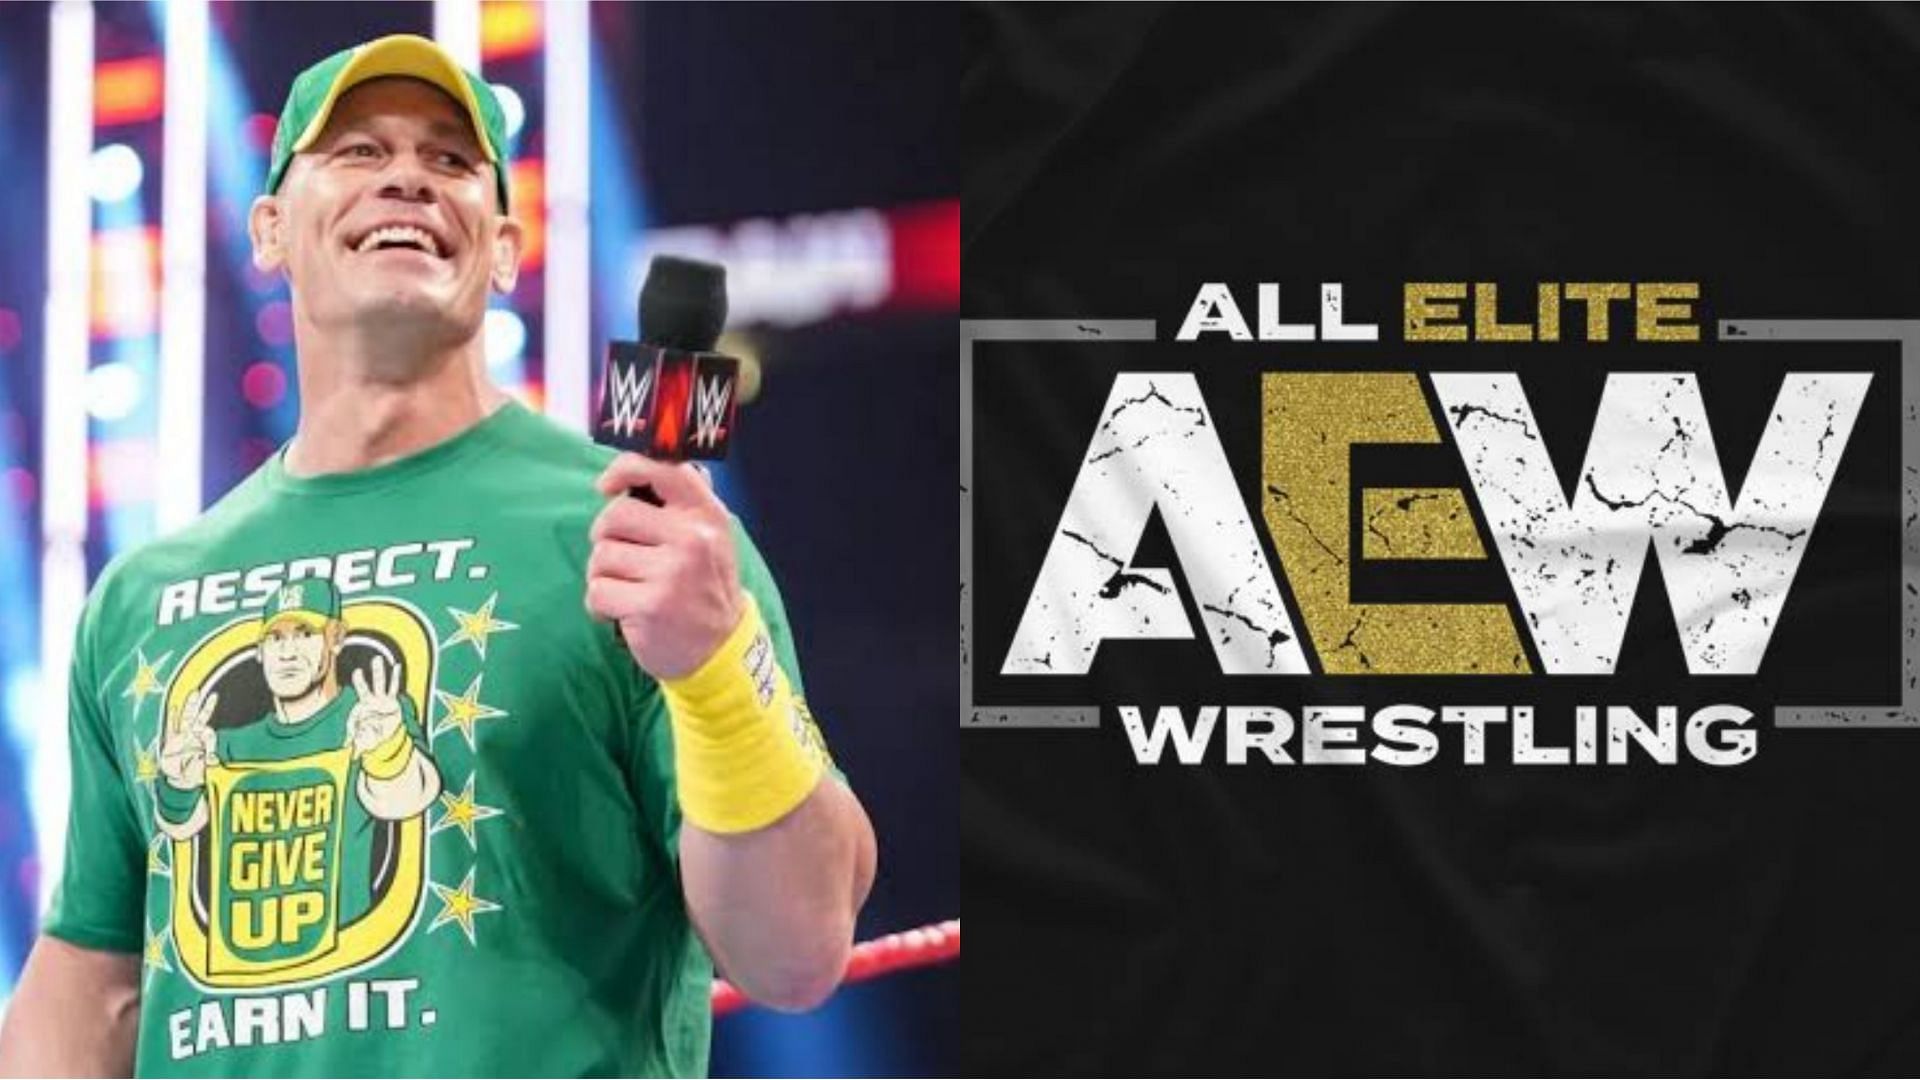 John Cena seemingly has brought WWE and AEW together